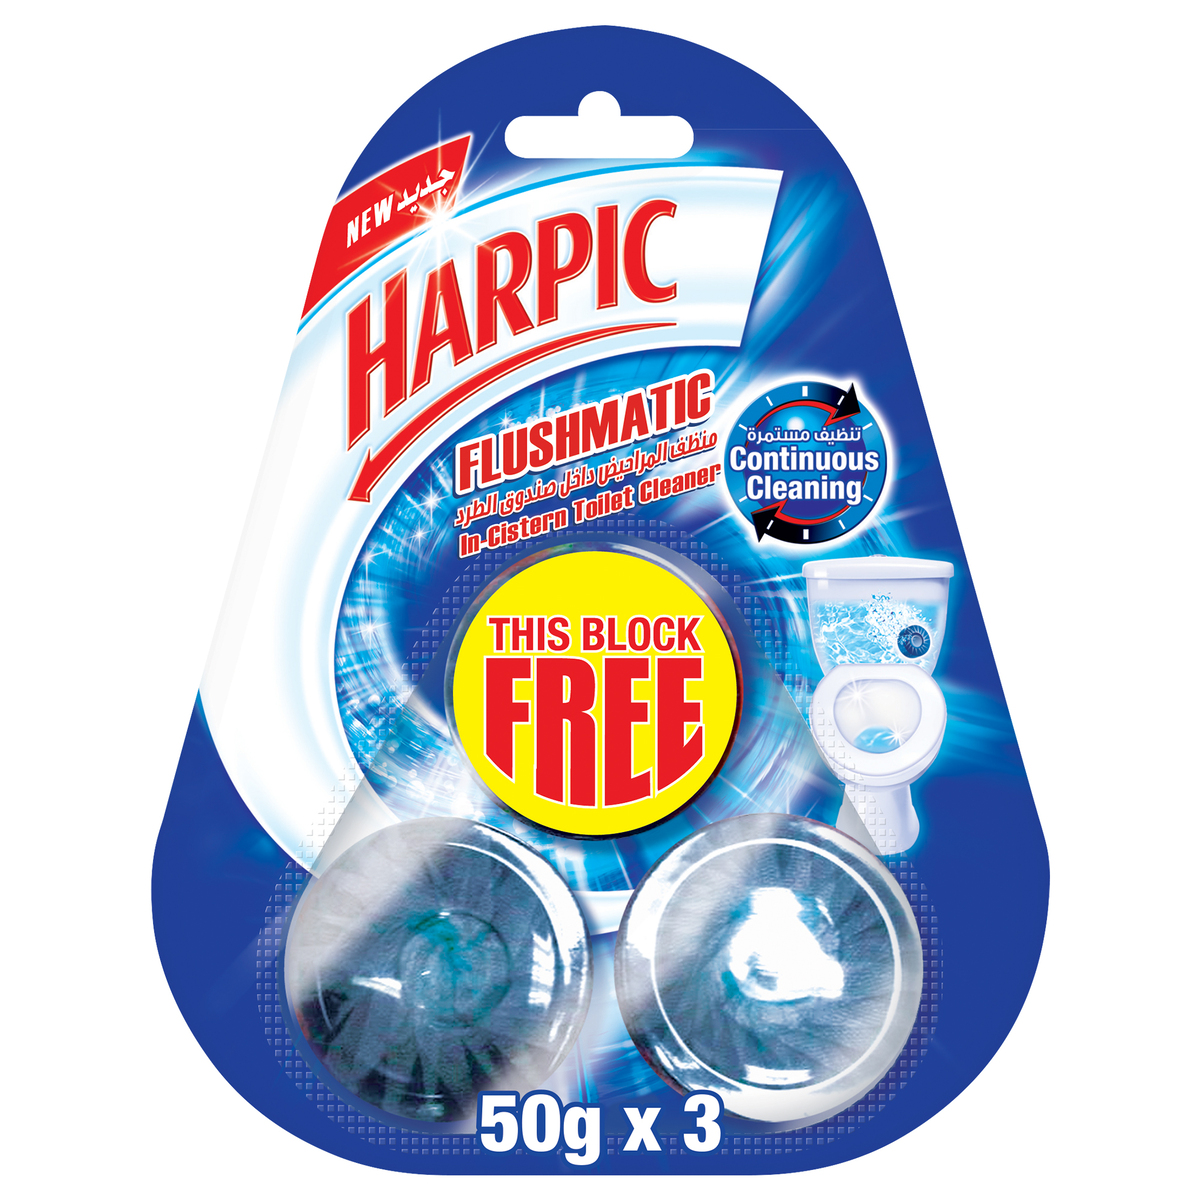 Harpic Flushmatic In-Cistern Toilet Cleaner 3 x 50 g